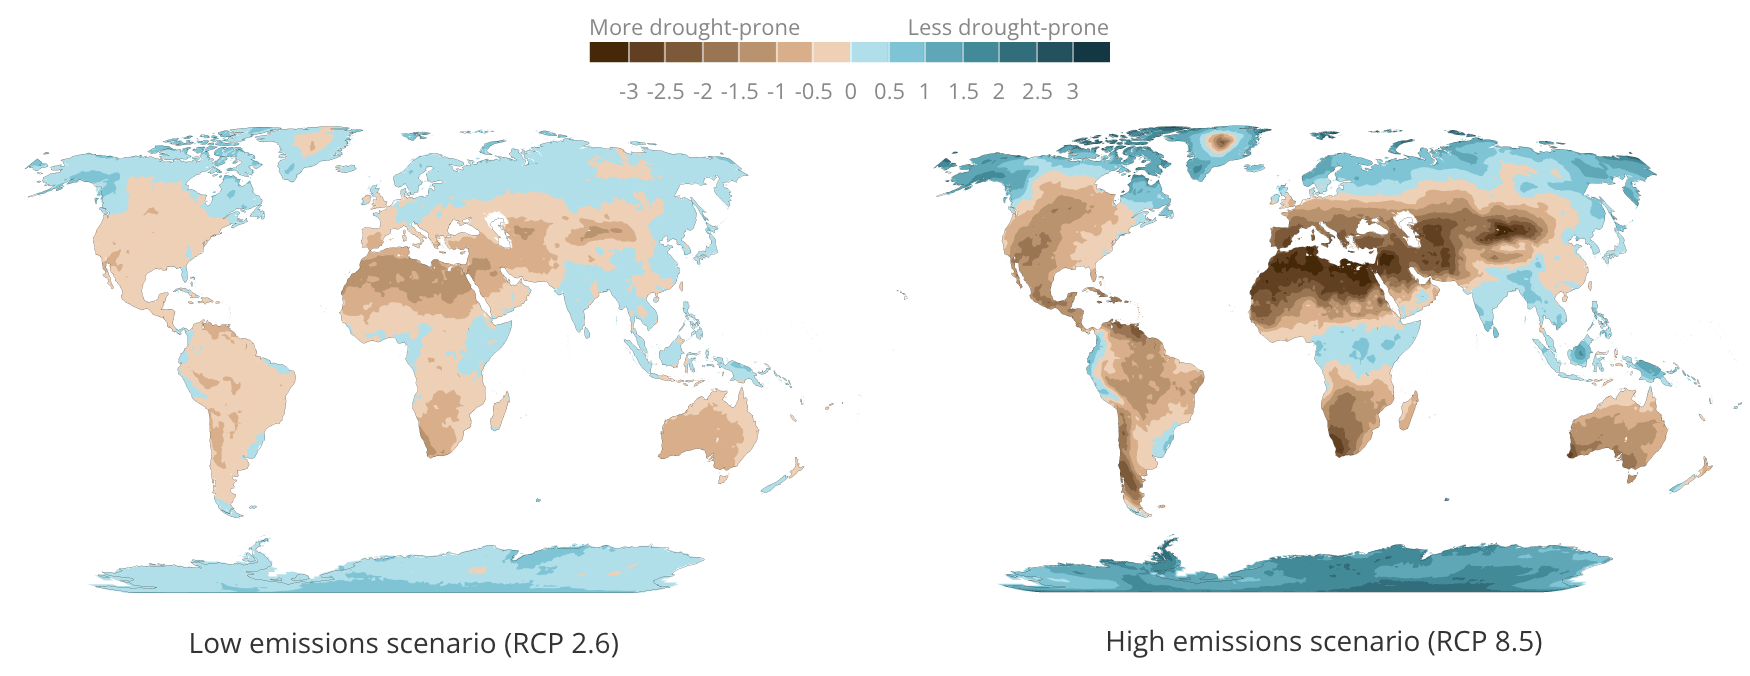 2 world maps showing the impact on droughts under 2 emission scenarios. The labels above the legend read 'More drought-prone' (left) and 'Less drought-prone' right